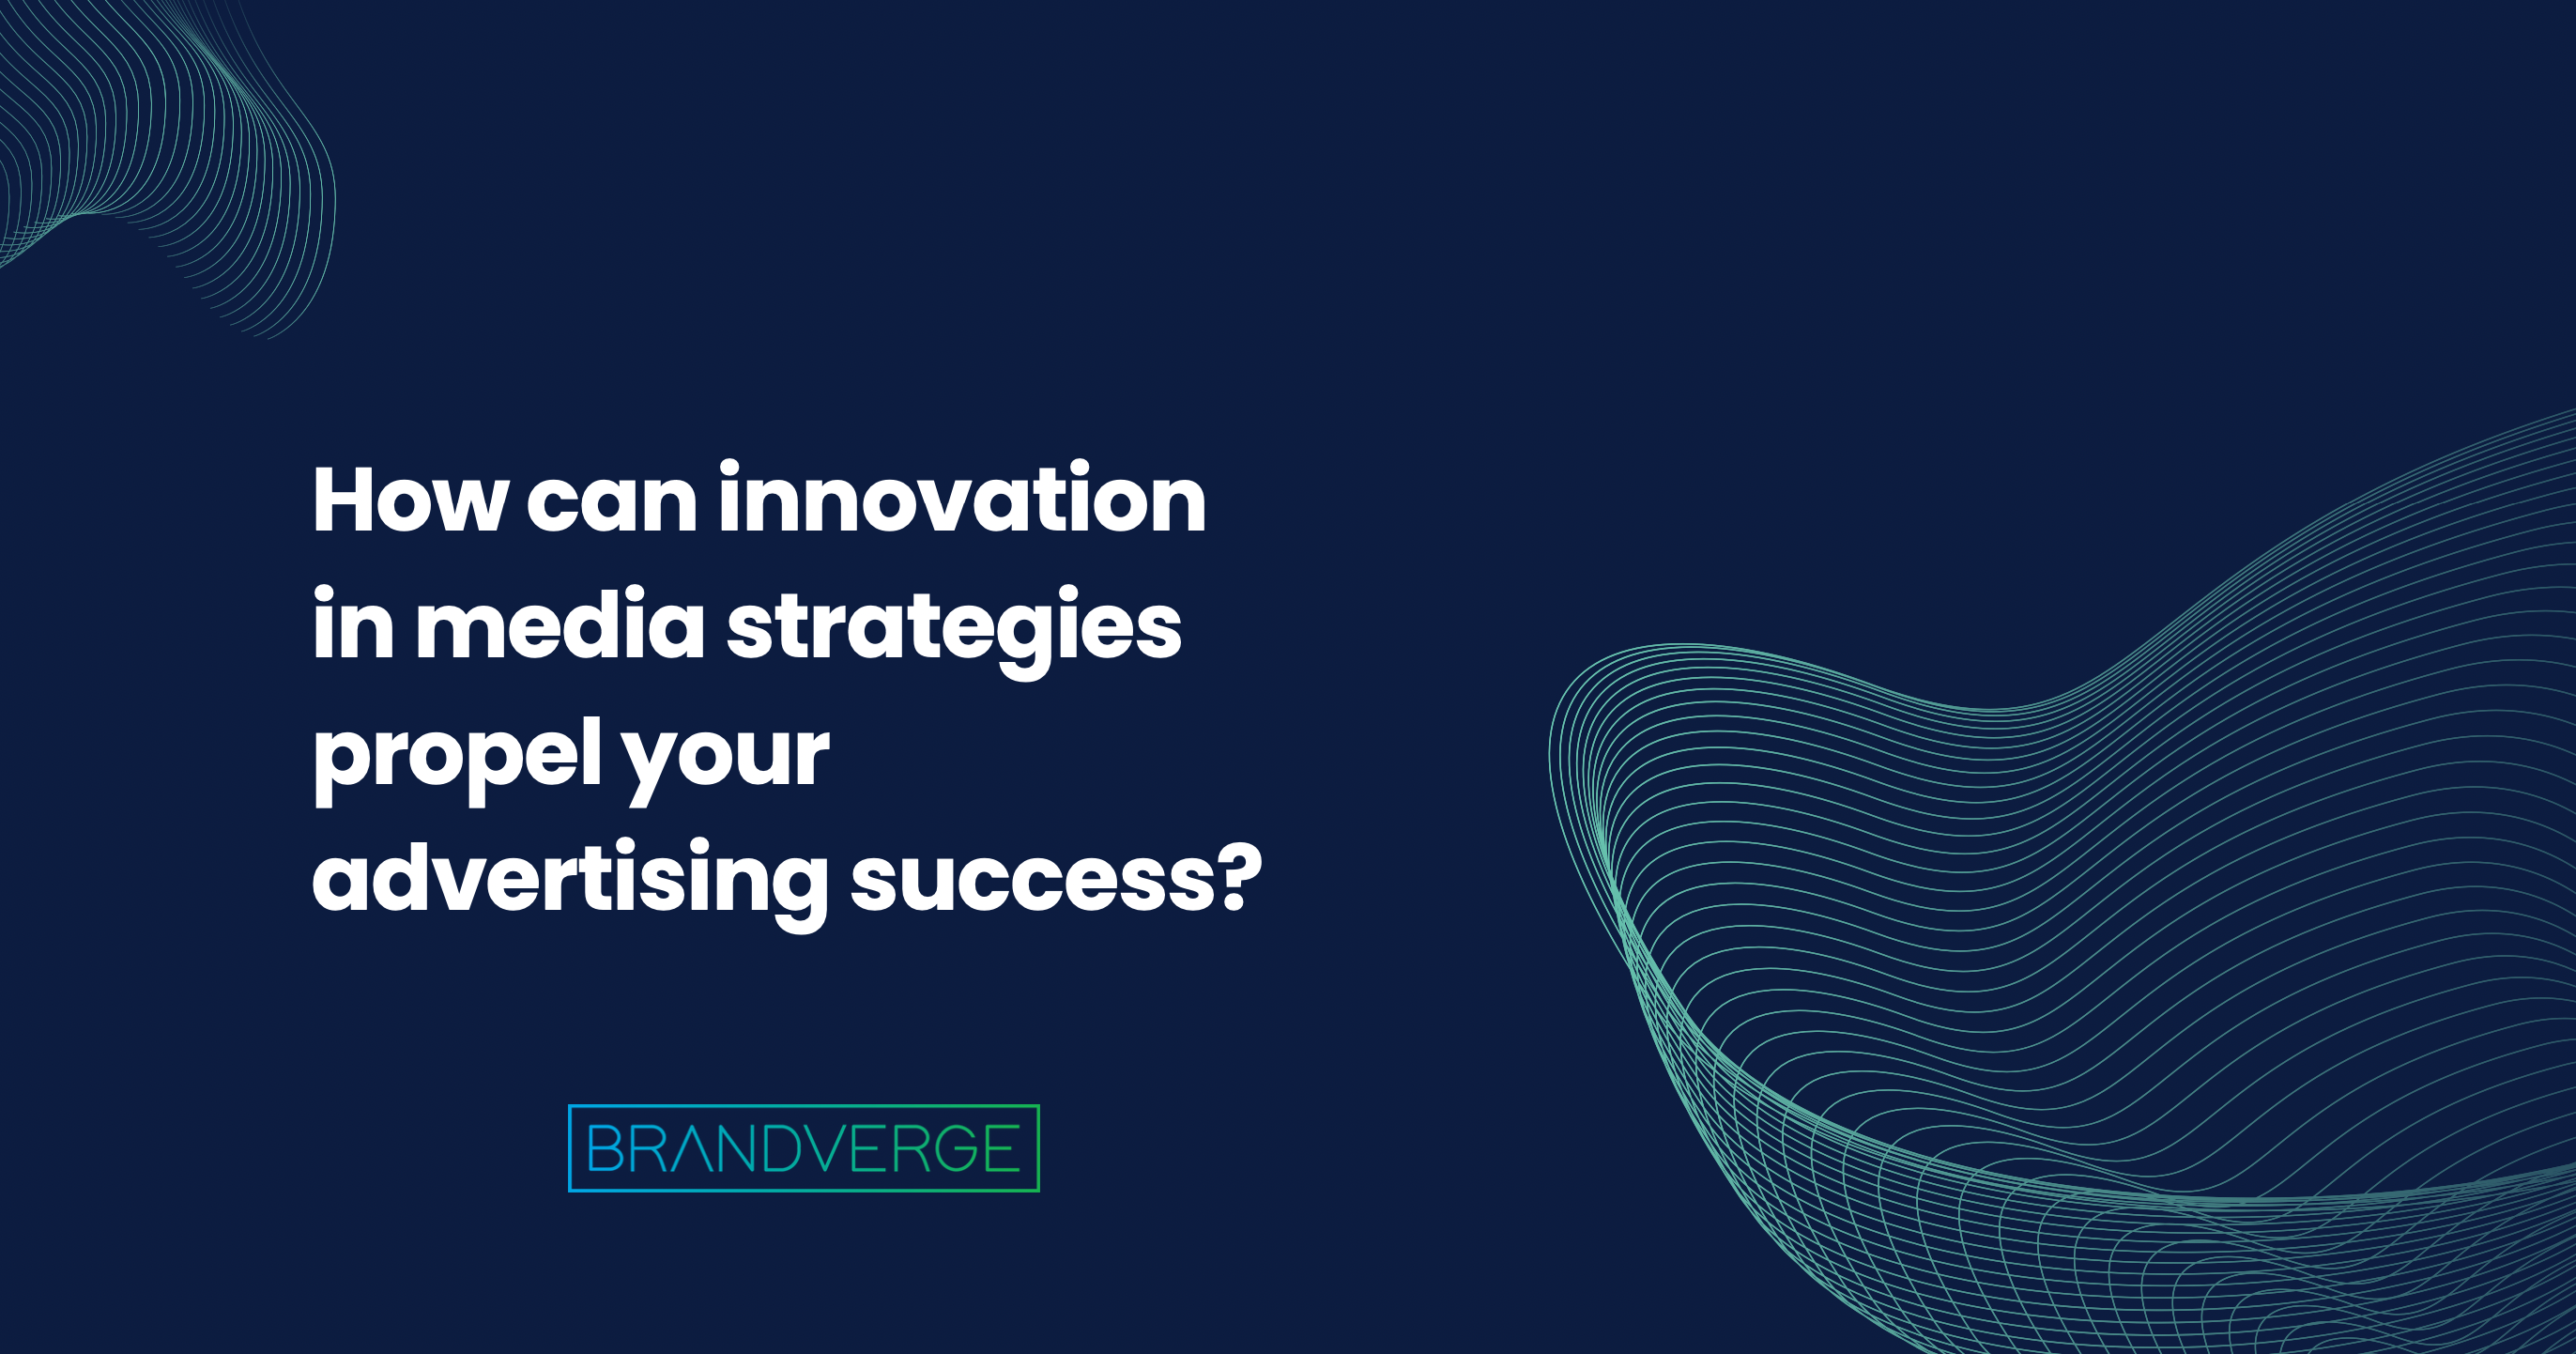 How Can Innovation in Media Strategies Propel Your Advertising Success?